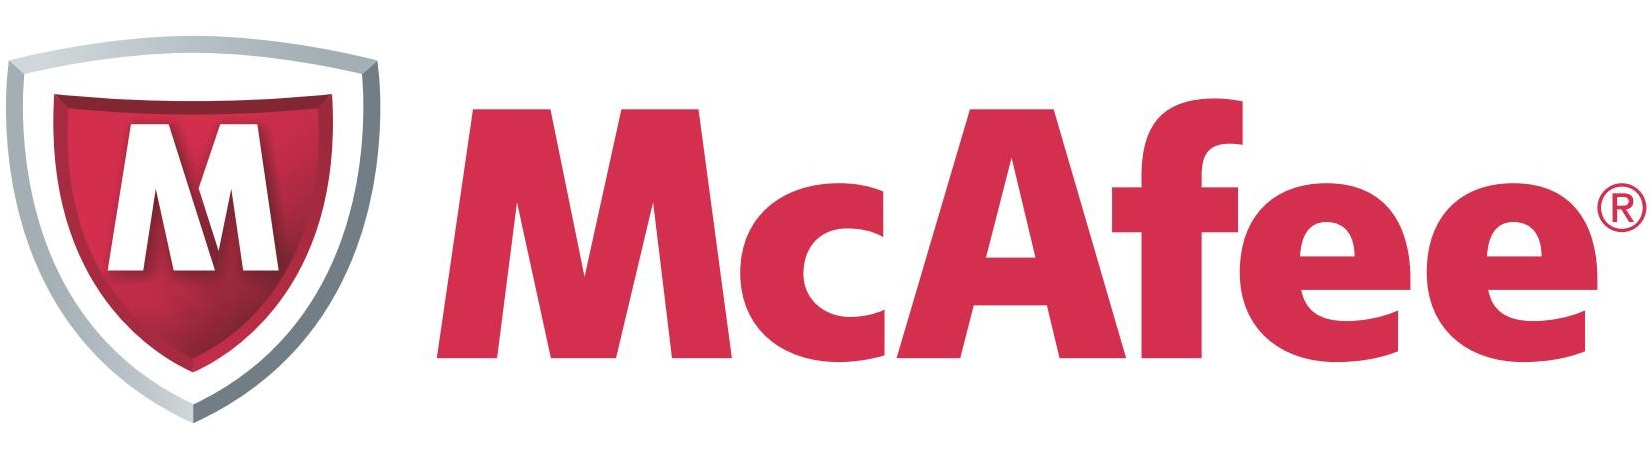 McAfee Complete Data Protection Advanced With 1 year Gold Software Support - Perpetual License - 1 Node